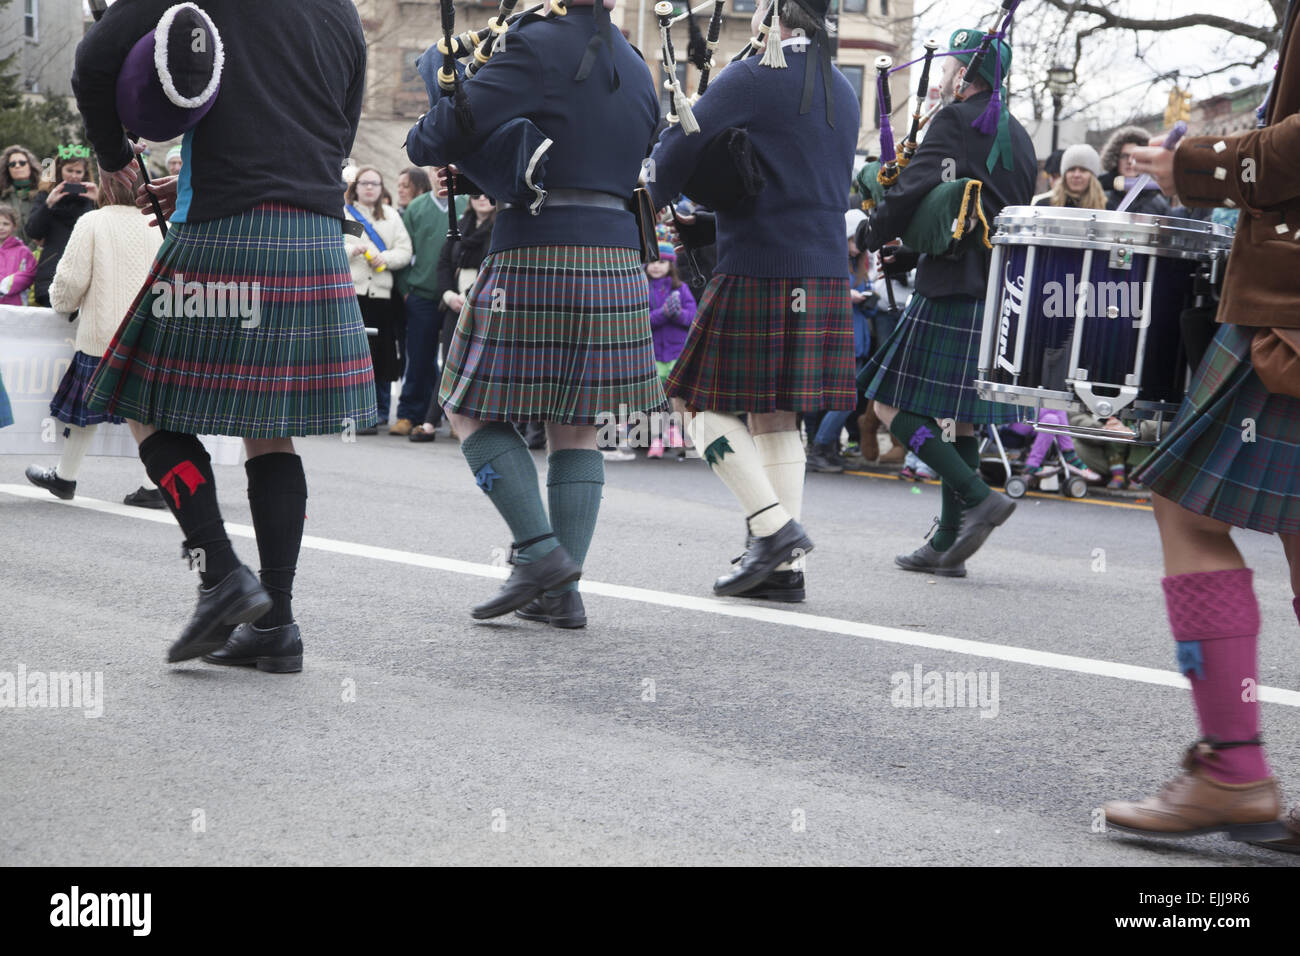 Bagpipers march in the St. Patrick's Day Parade in Park Slope, Brooklyn, NY. Stock Photo